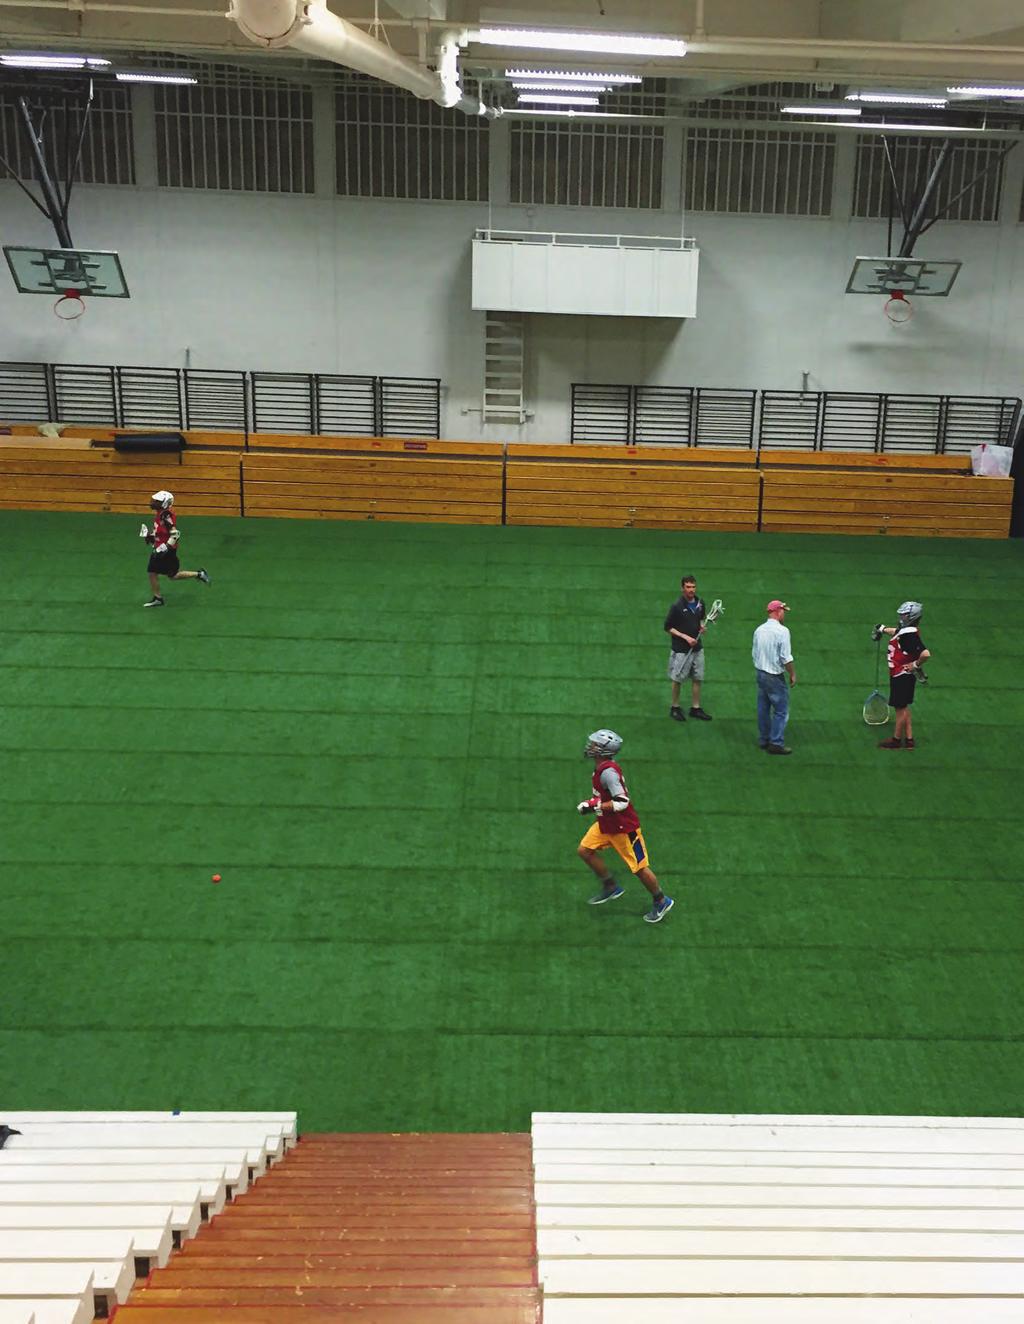 TURN ANY BUILDING INTO AN INDOOR PRACTICE FIELD IN JUST